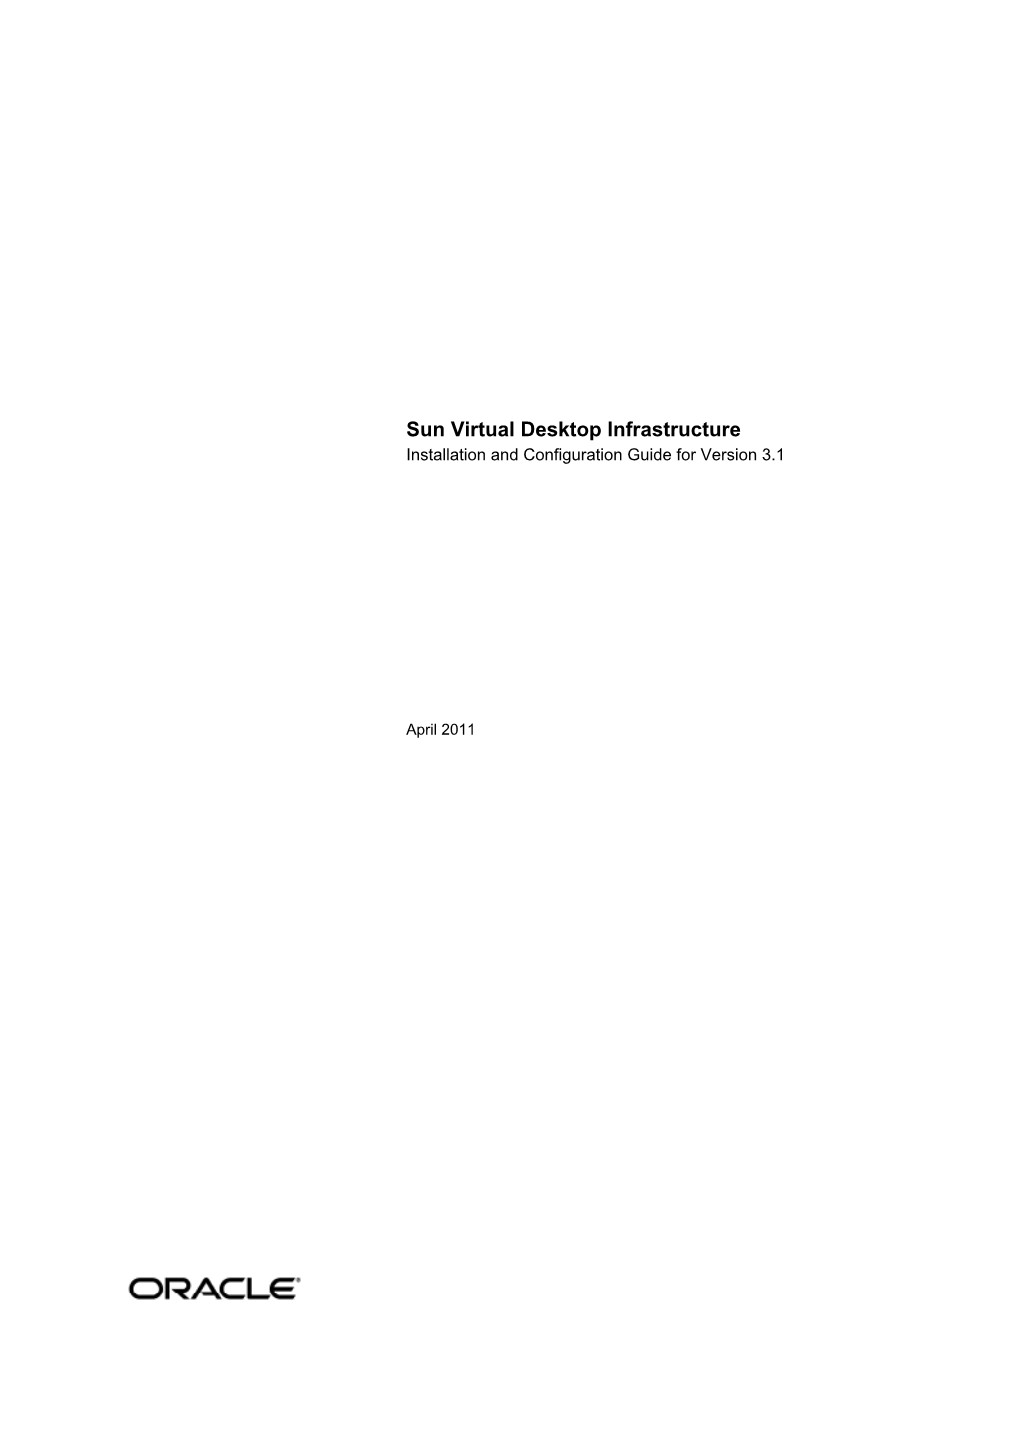 Sun Virtual Desktop Infrastructure Installation and Configuration Guide for Version 3.1